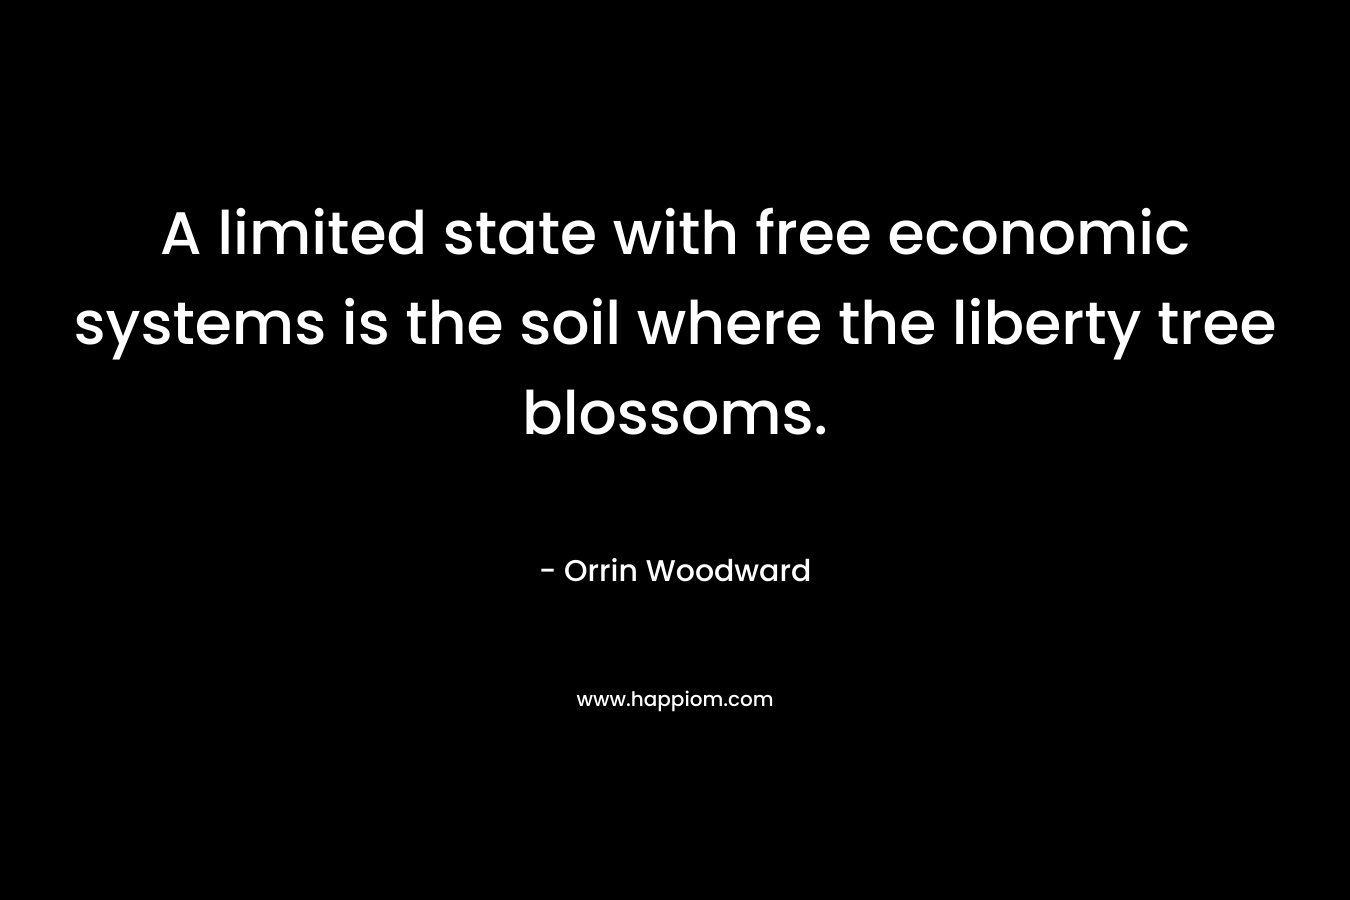 A limited state with free economic systems is the soil where the liberty tree blossoms. – Orrin Woodward